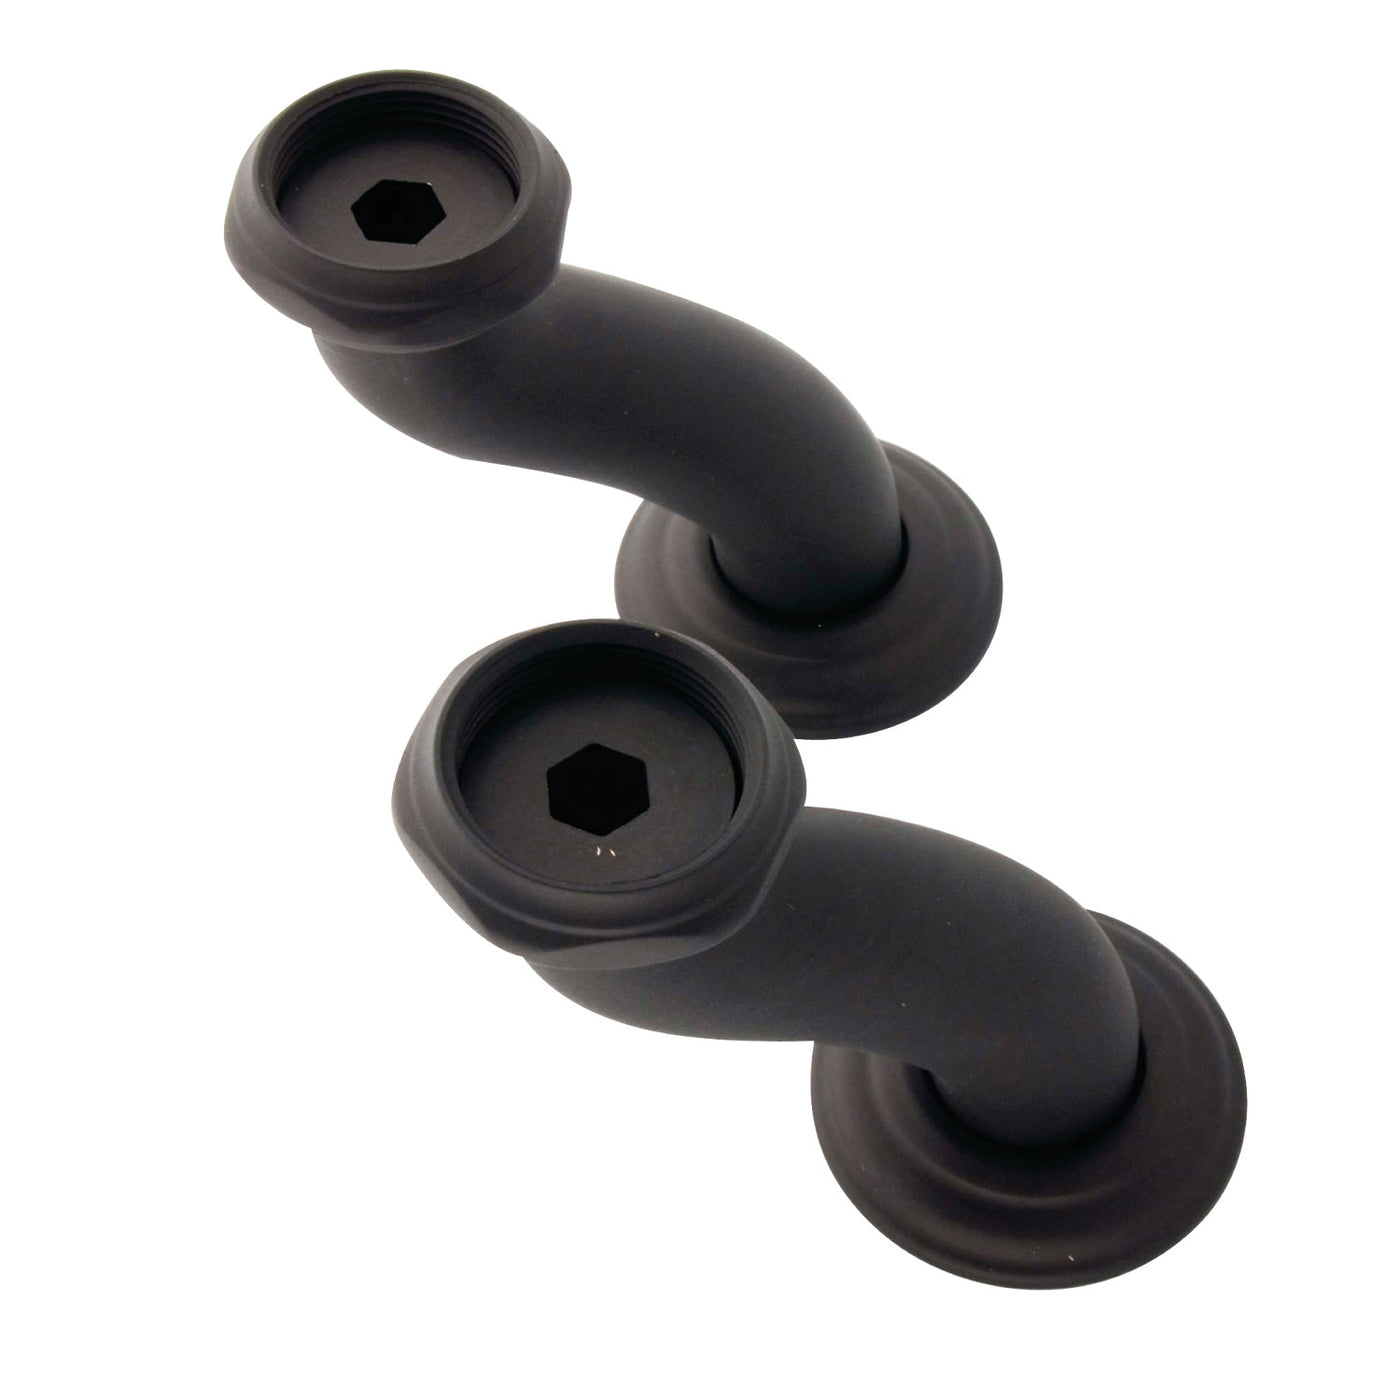 Elements of Design DSU405 S Shape Swing Elbow for Deck Mount Tub Filler CC410T5 Series, Oil Rubbed Bronze